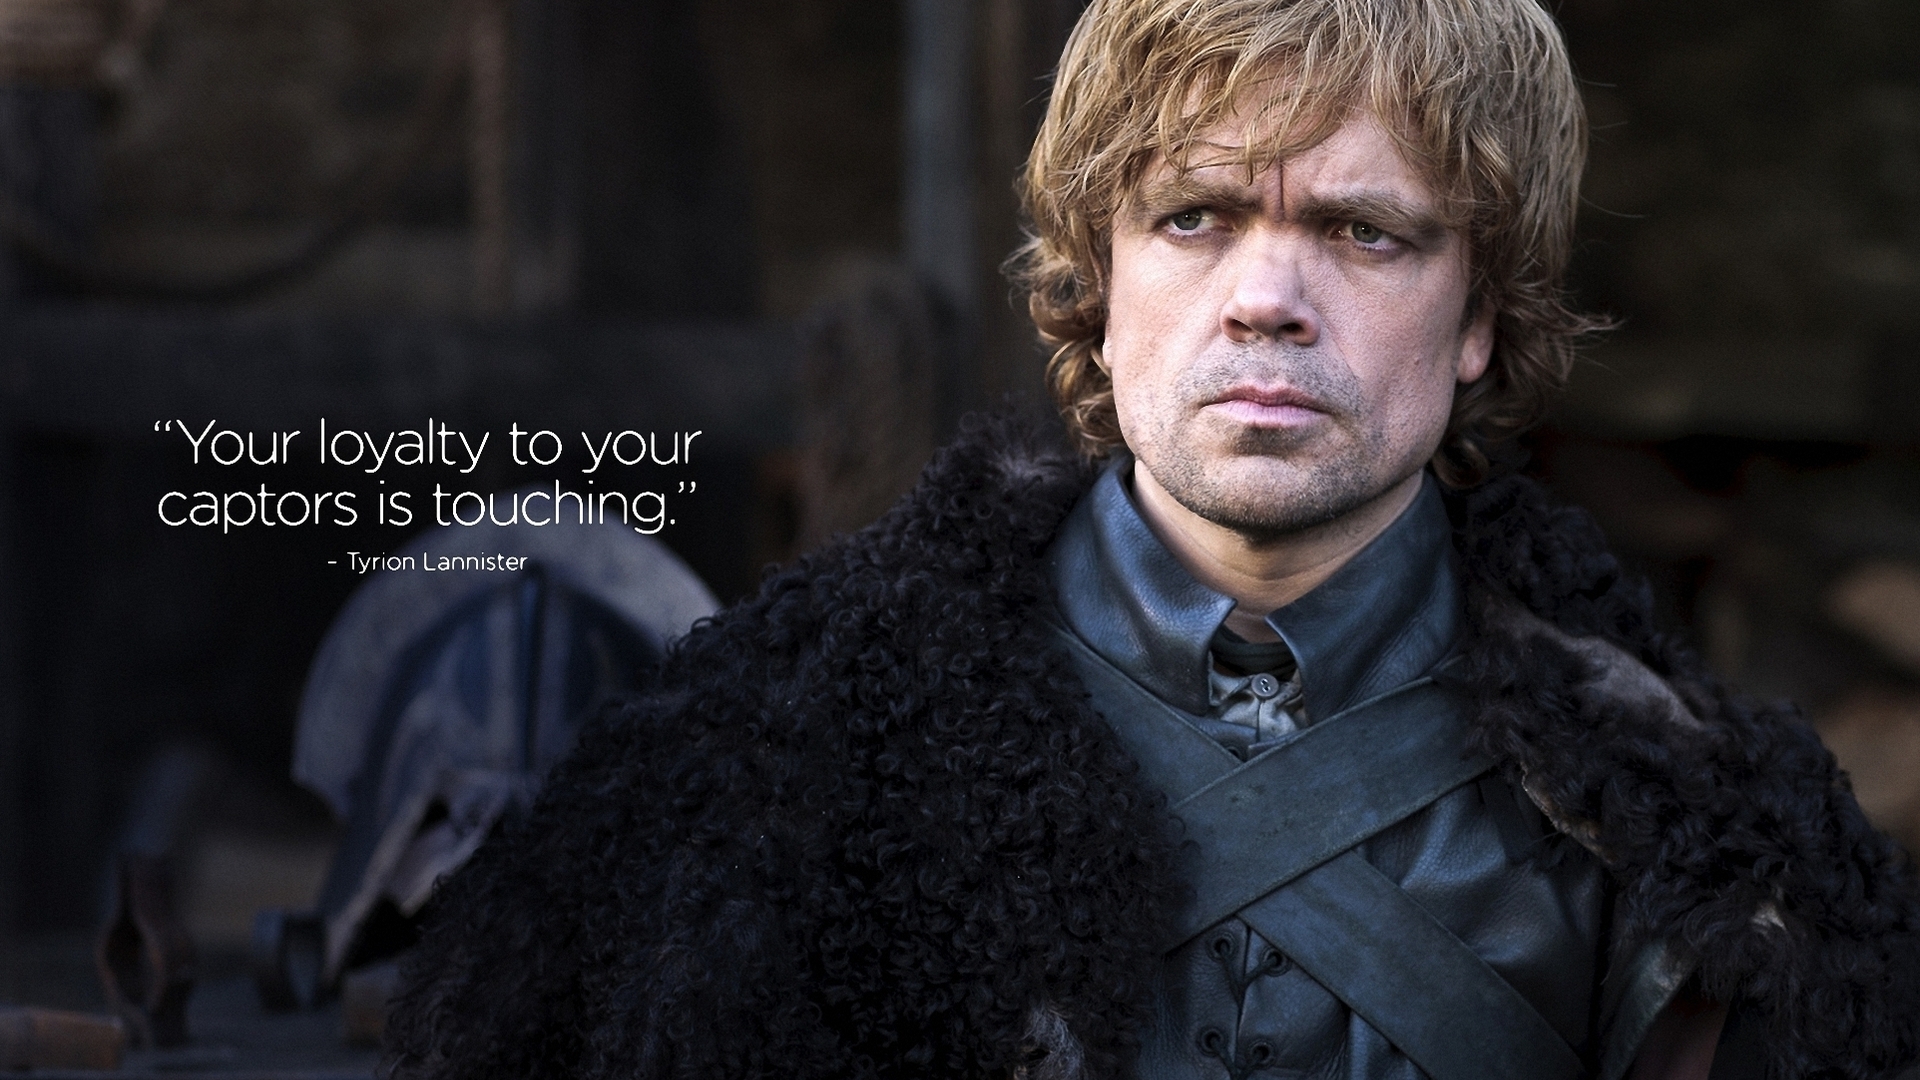 Tyrion Lannister Quote Game of Thrones for 1920 x 1080 HDTV 1080p resolution